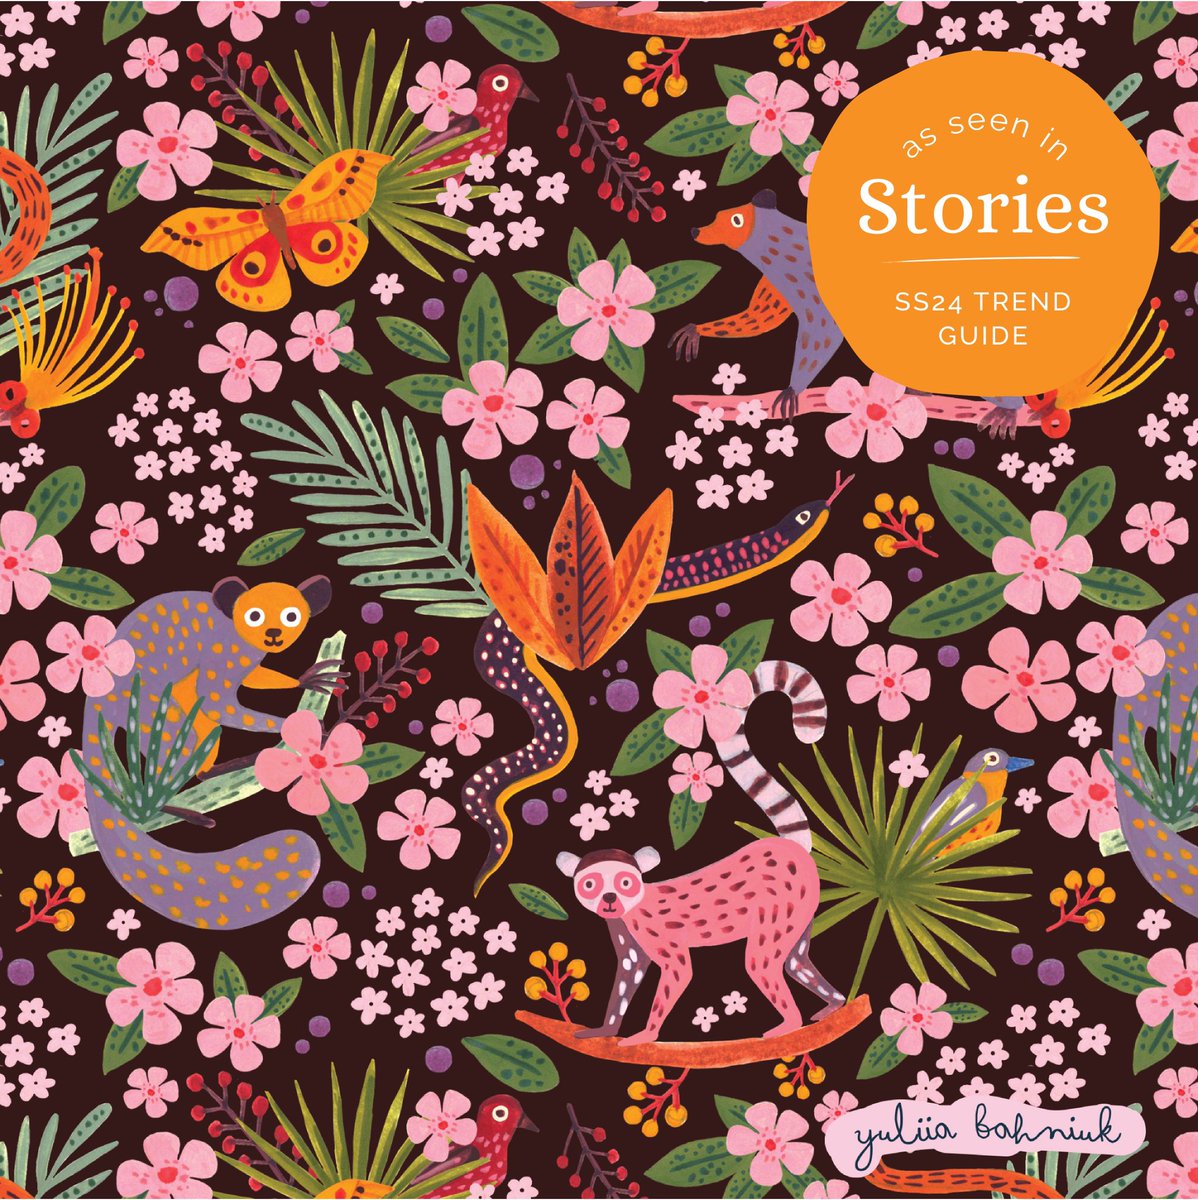 I'm so glad that my pattern design has been selected to be featured in SS24  issue of Stories - a Trend Publication by Paper&Cloth Design Studio presenting a collection of the latest cultural trends from the world of print and design.

#pattern #artlicensing #illustration